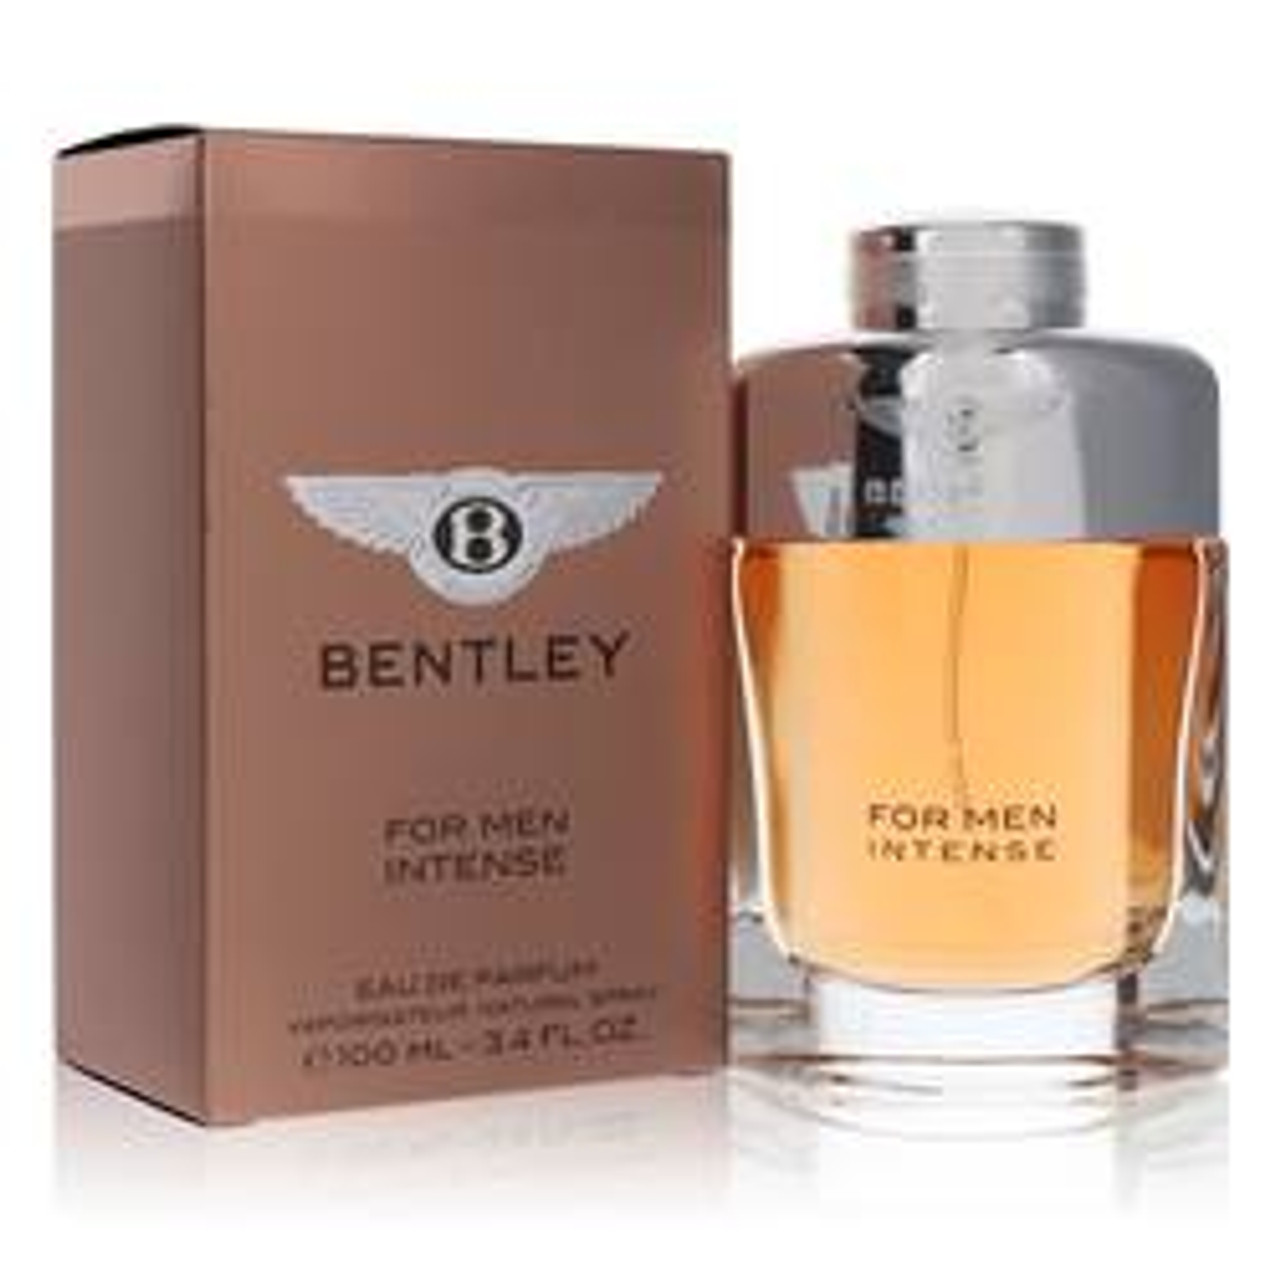 Bentley Intense Cologne By Bentley Eau De Parfum Spray 3.4 oz for Men - [From 144.00 - Choose pk Qty ] - *Ships from Miami